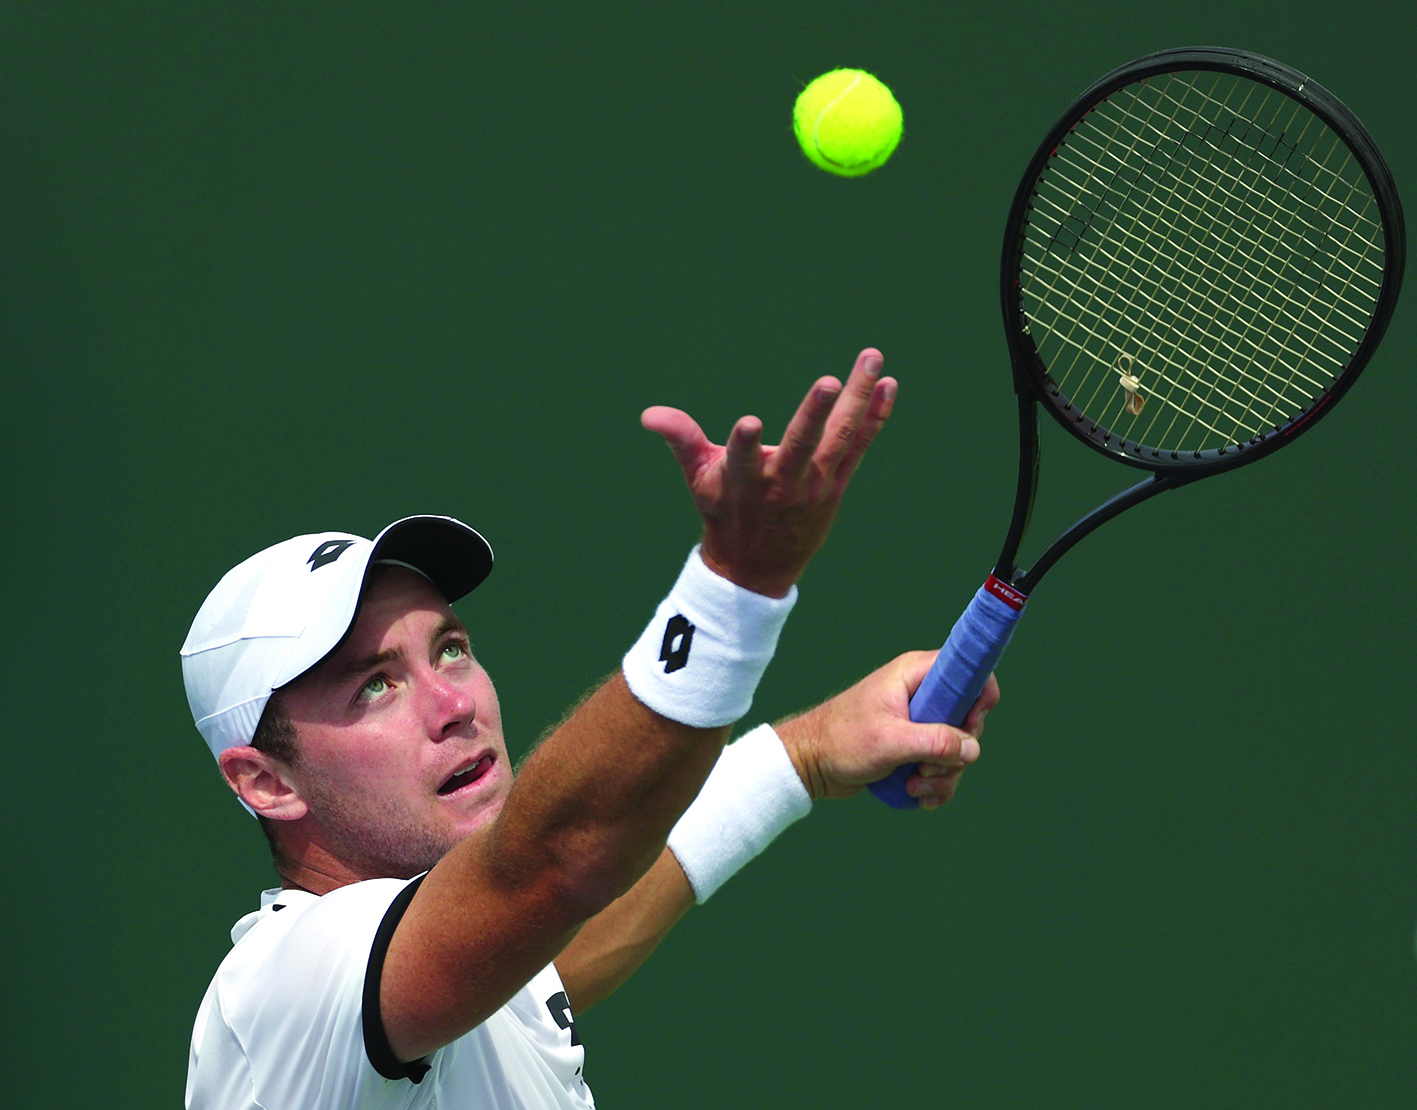 INDIAN WELLS: Dominik Koepfer of Germany serves in his match against Andrey Rublev of Russia during the BNP Paribas Open at the Indian Wells Tennis Garden on March 13, 2022.- AFPn